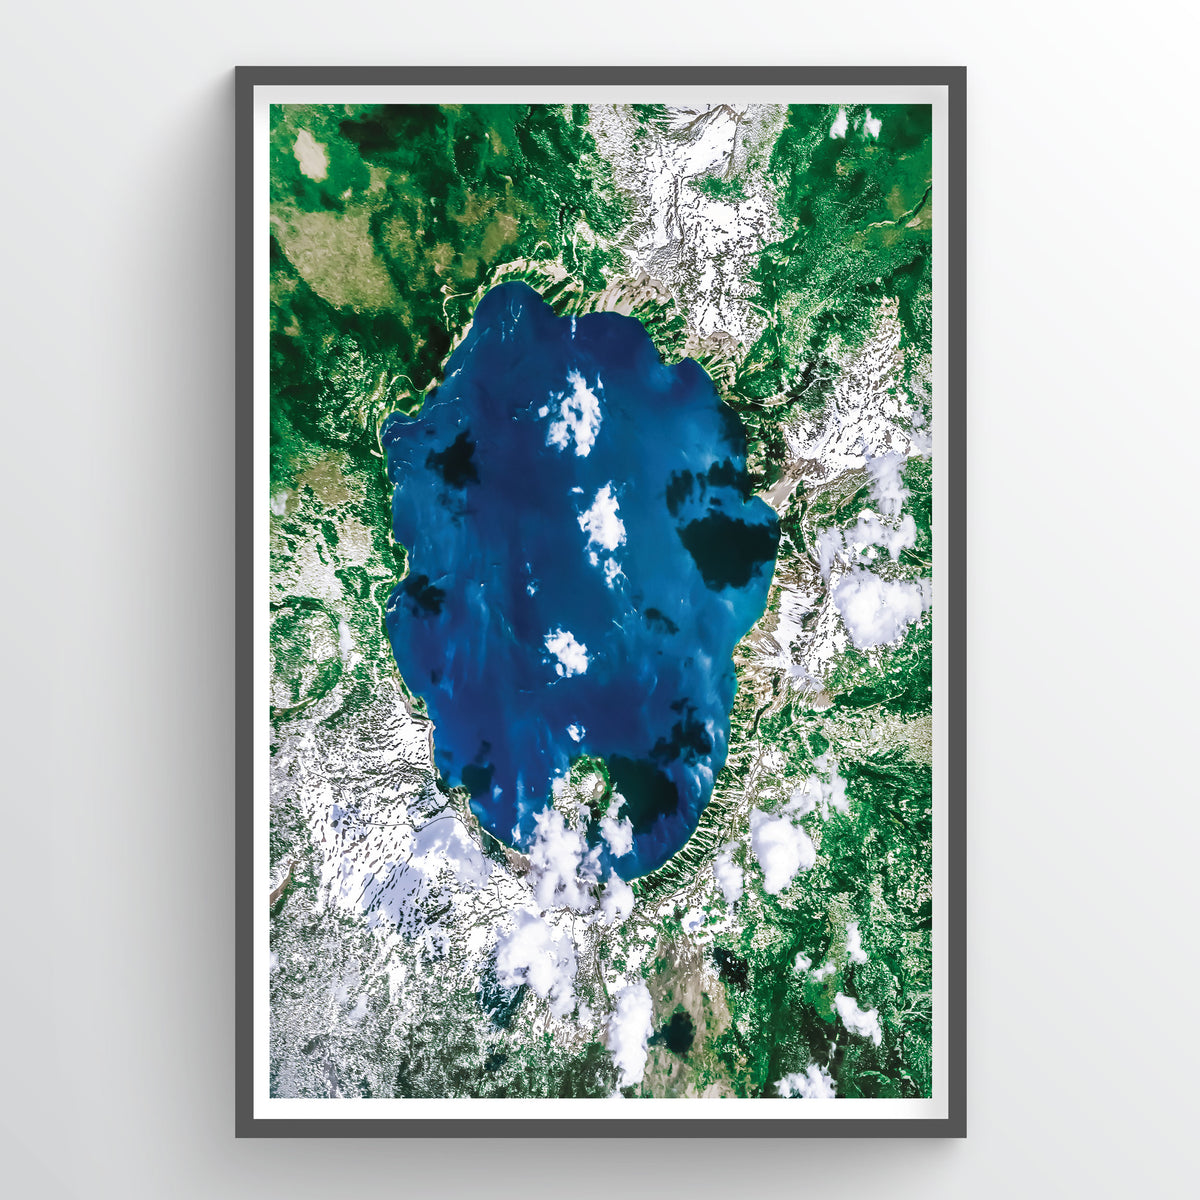 Crater Lake Earth Photography - Art Print - Point Two Design